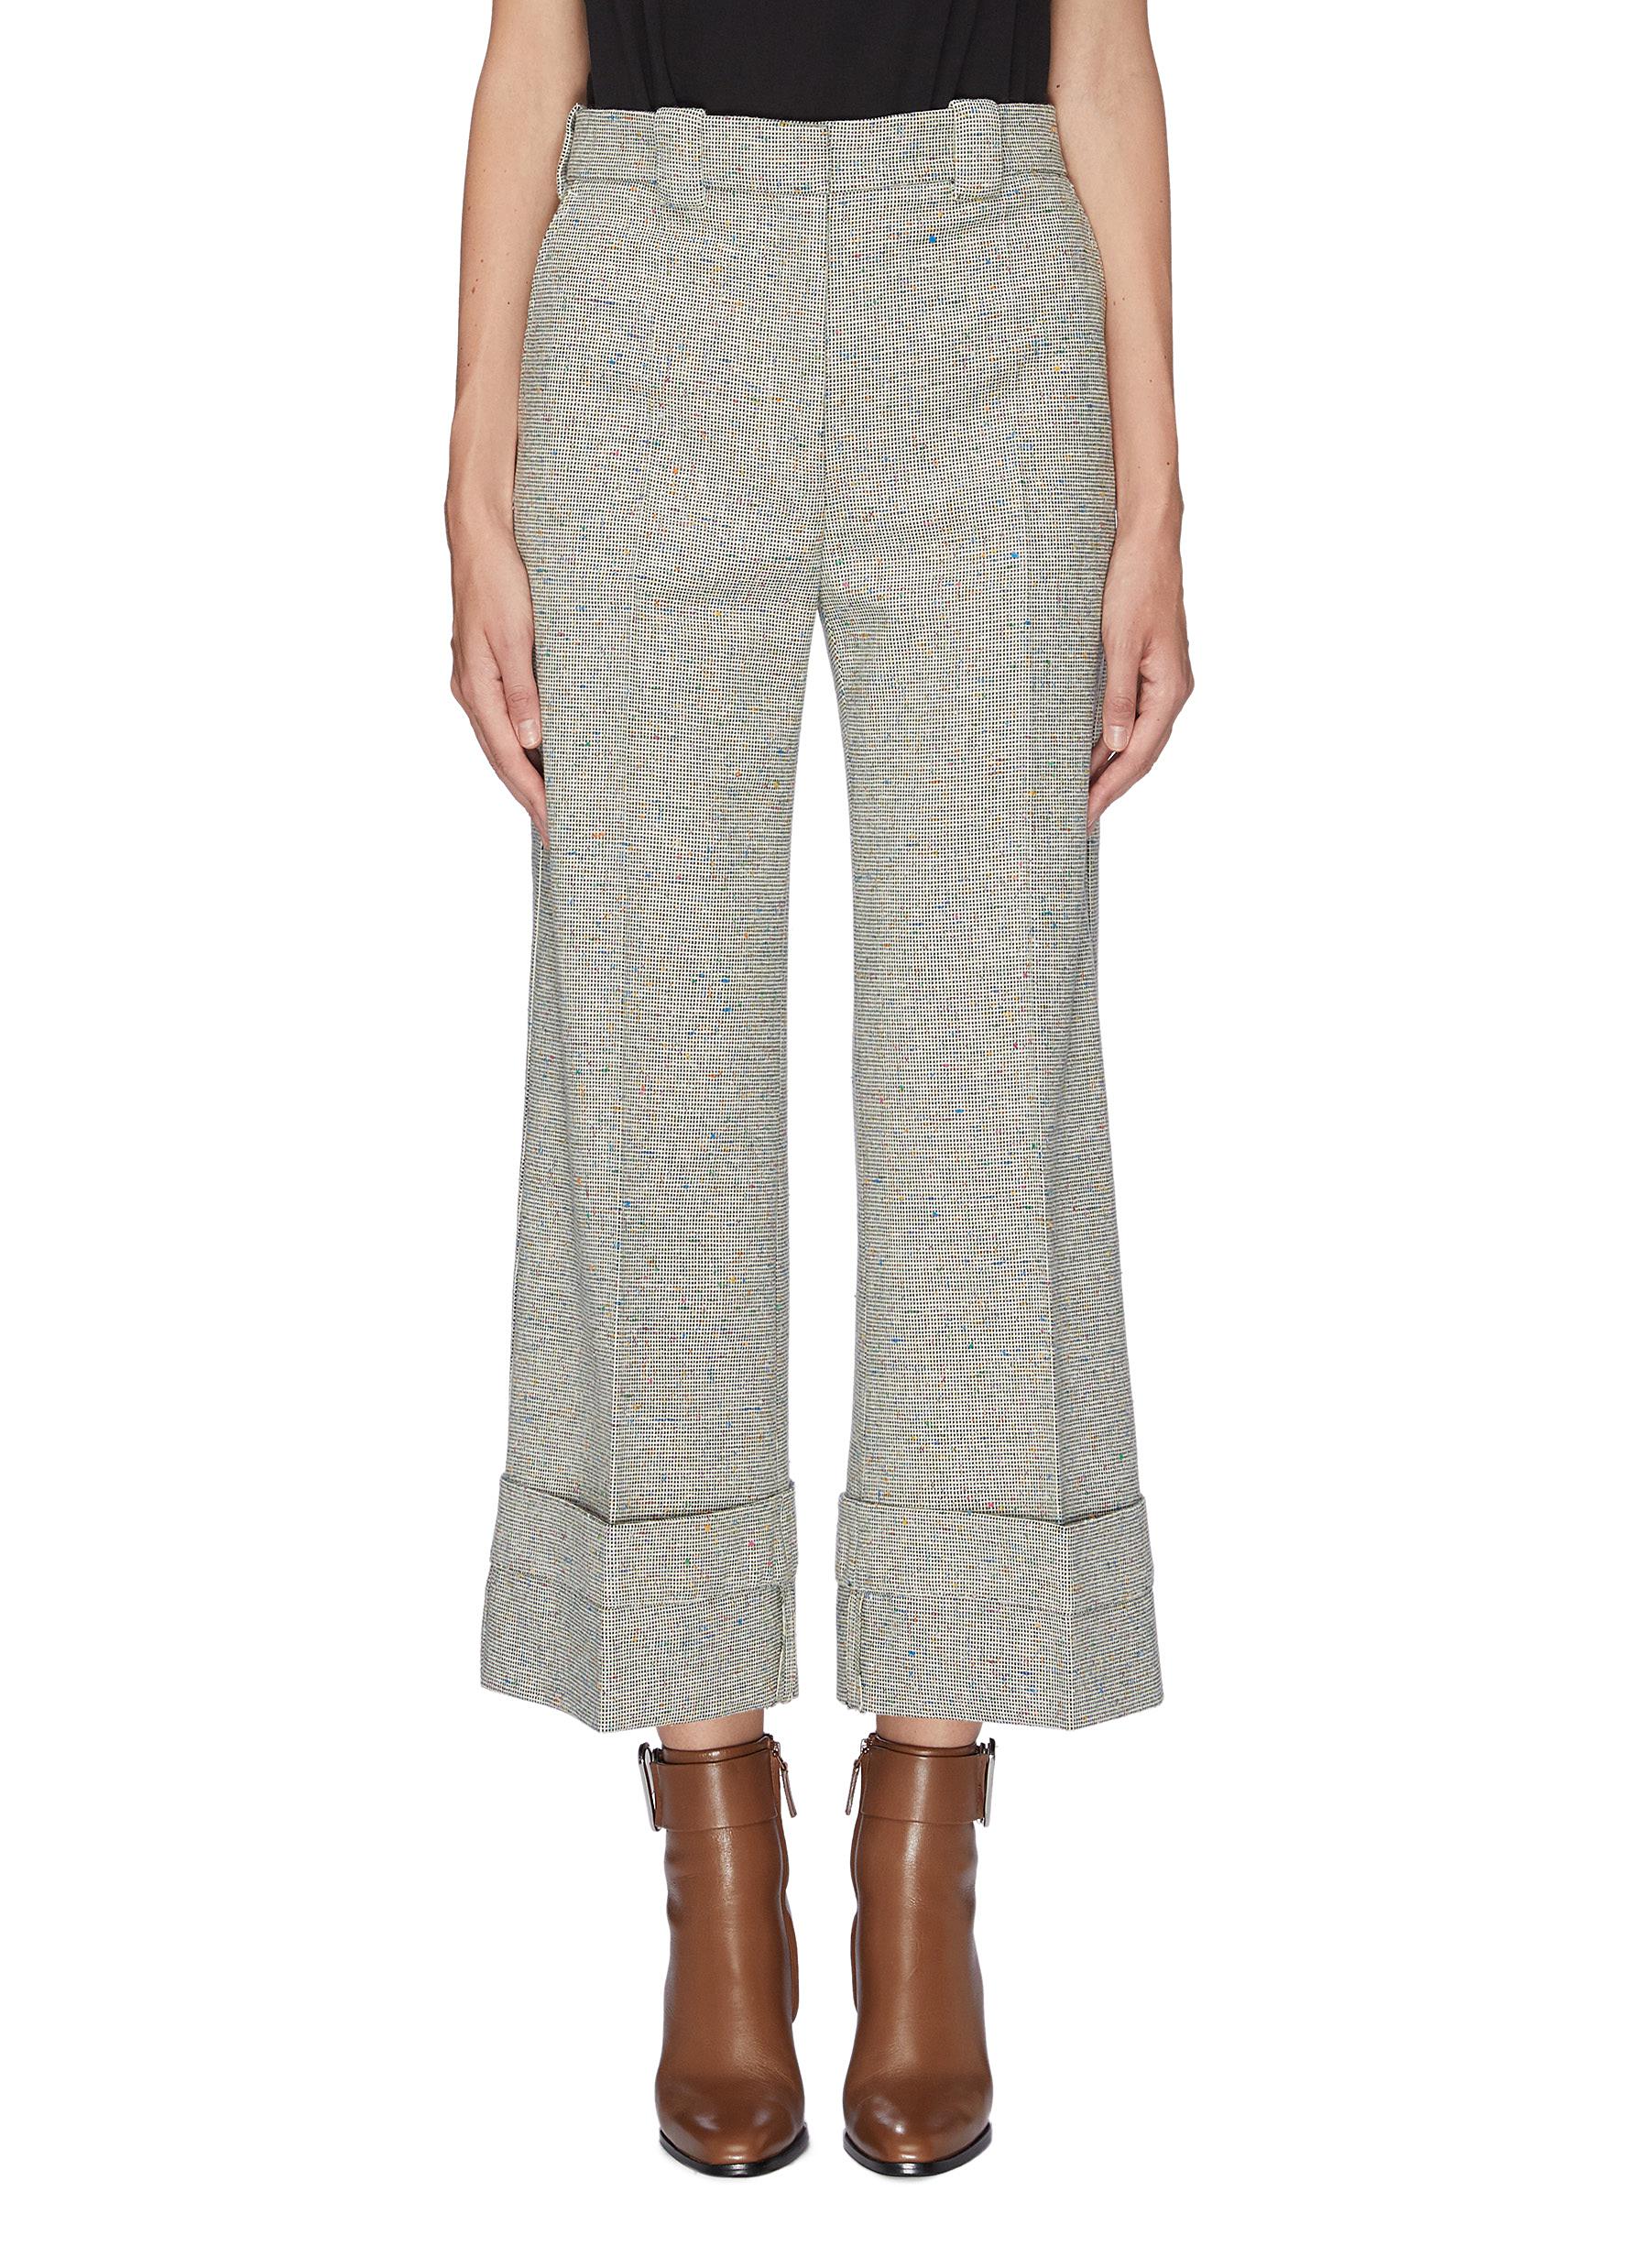 Fold up cuff speckled pants by Jw Anderson